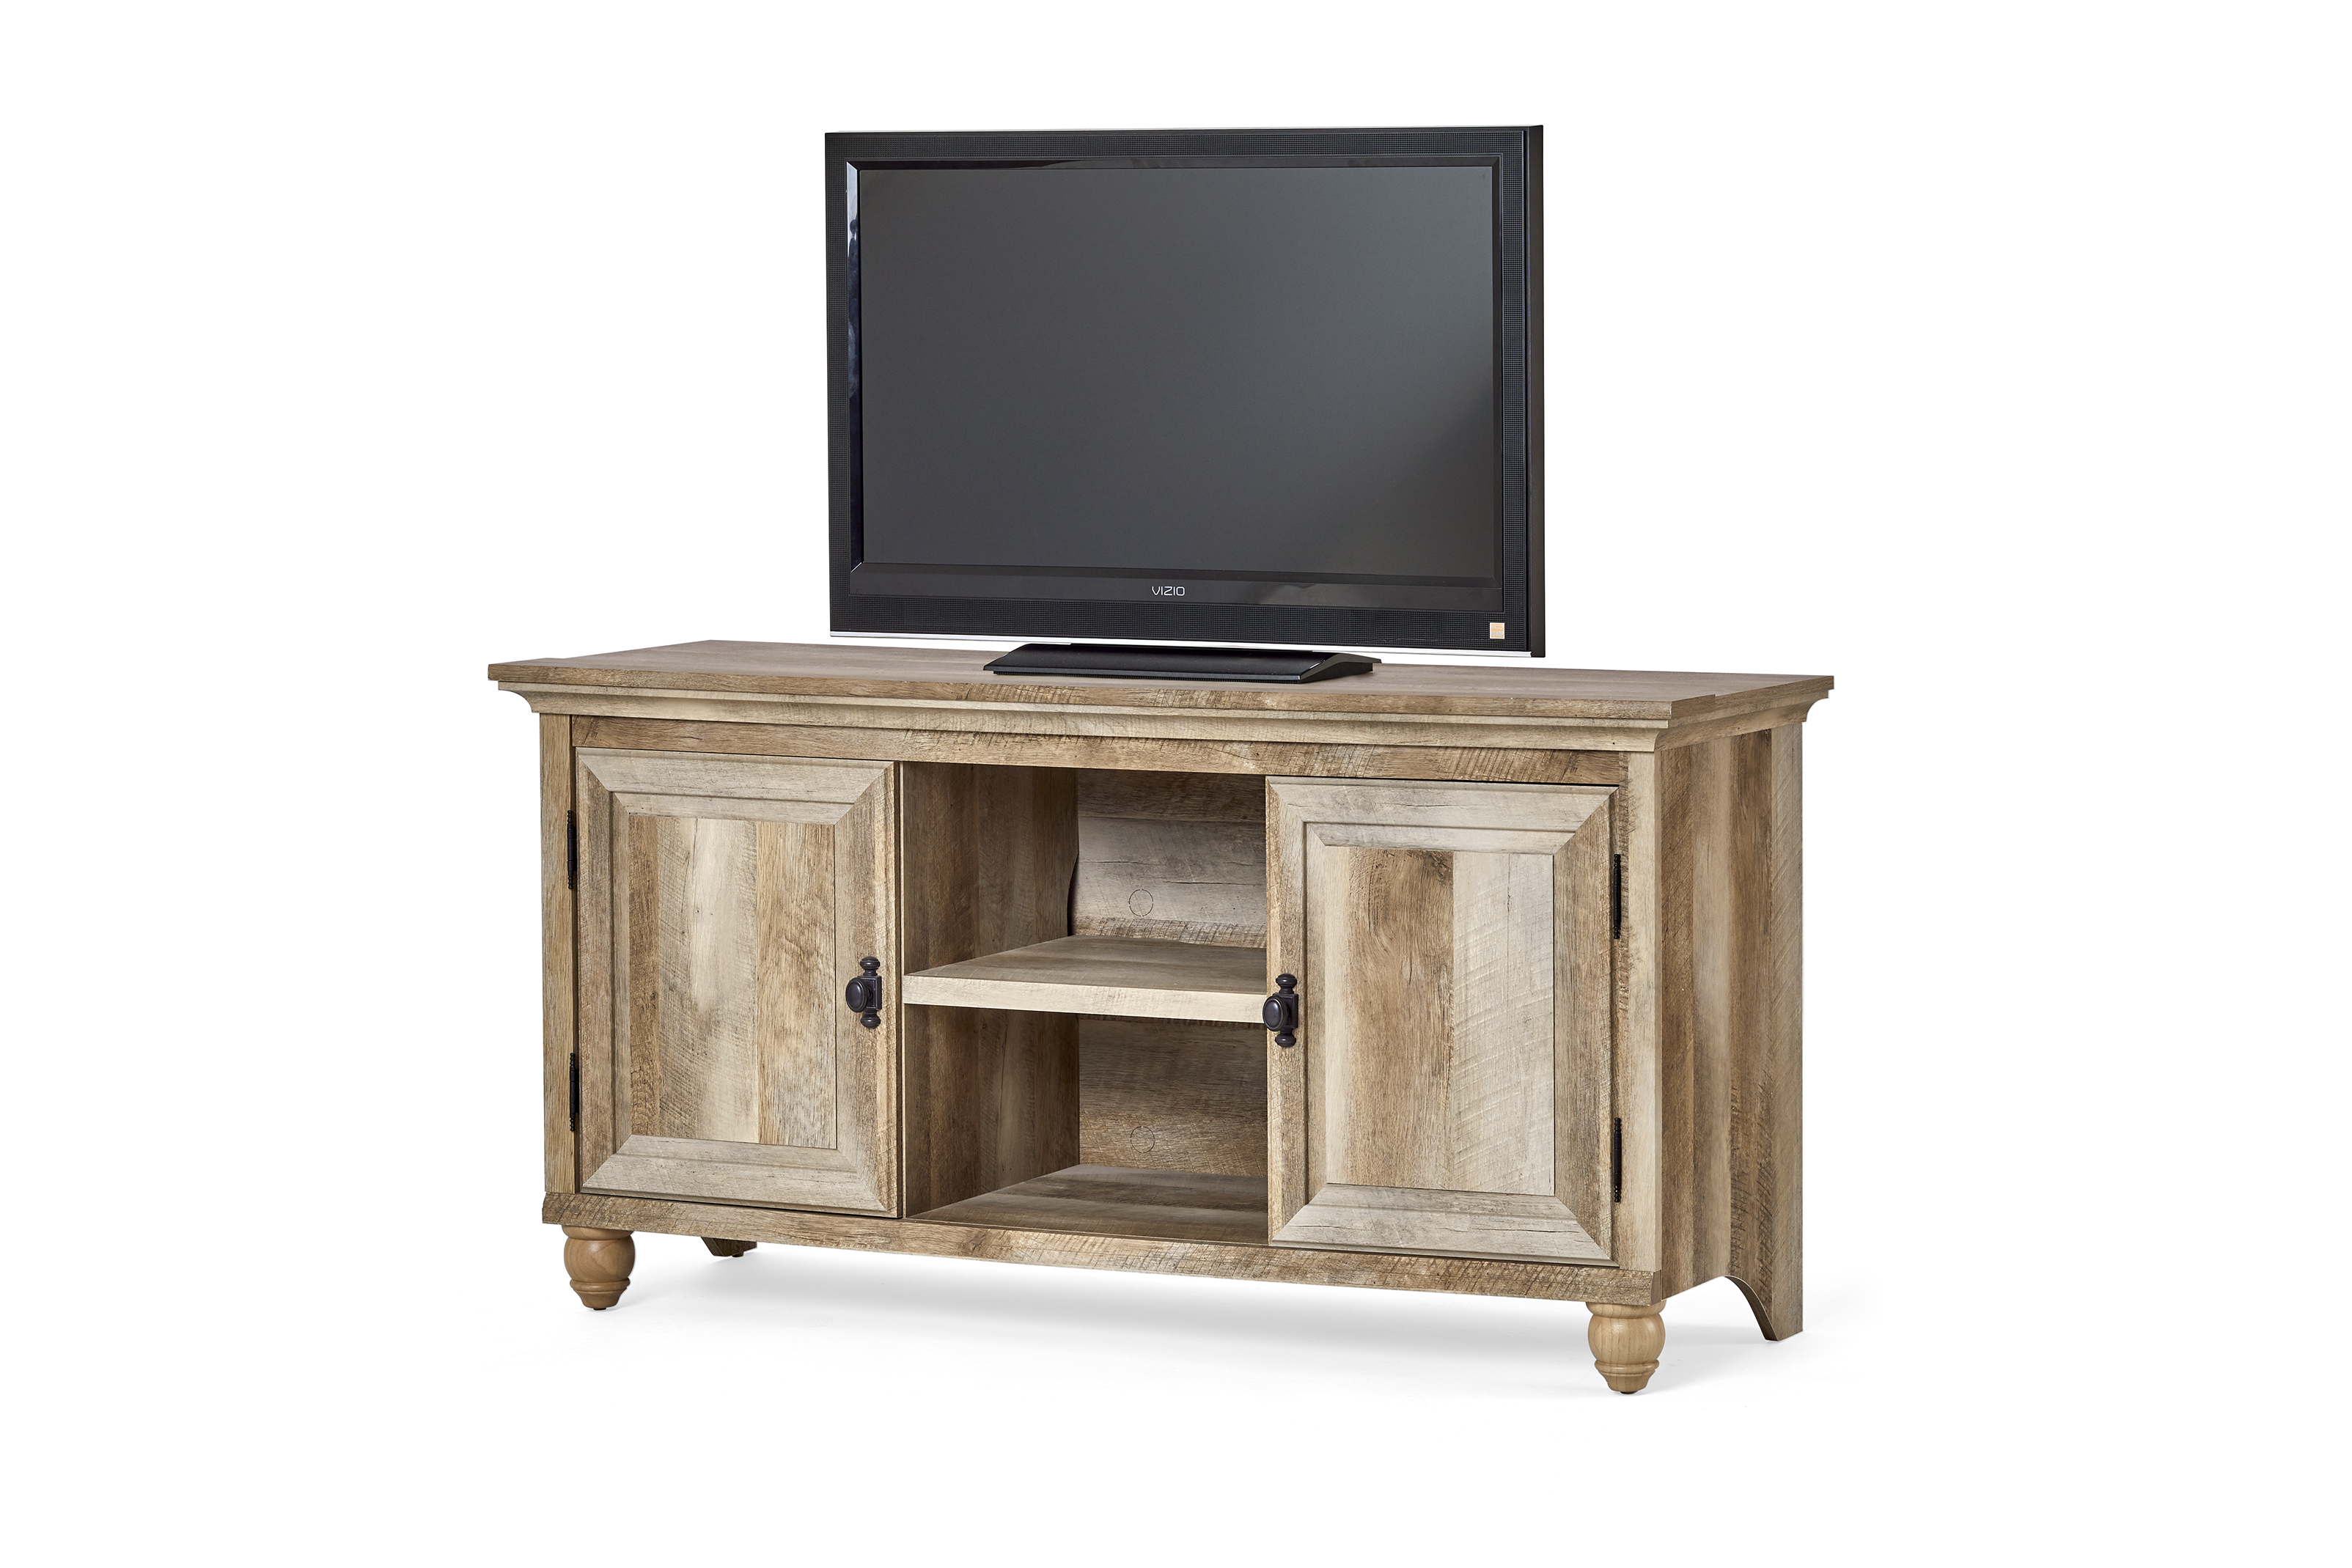 Better Homes & Gardens Crossmill TV Stand for TVs up to 65", Weathered Finish - image 4 of 9